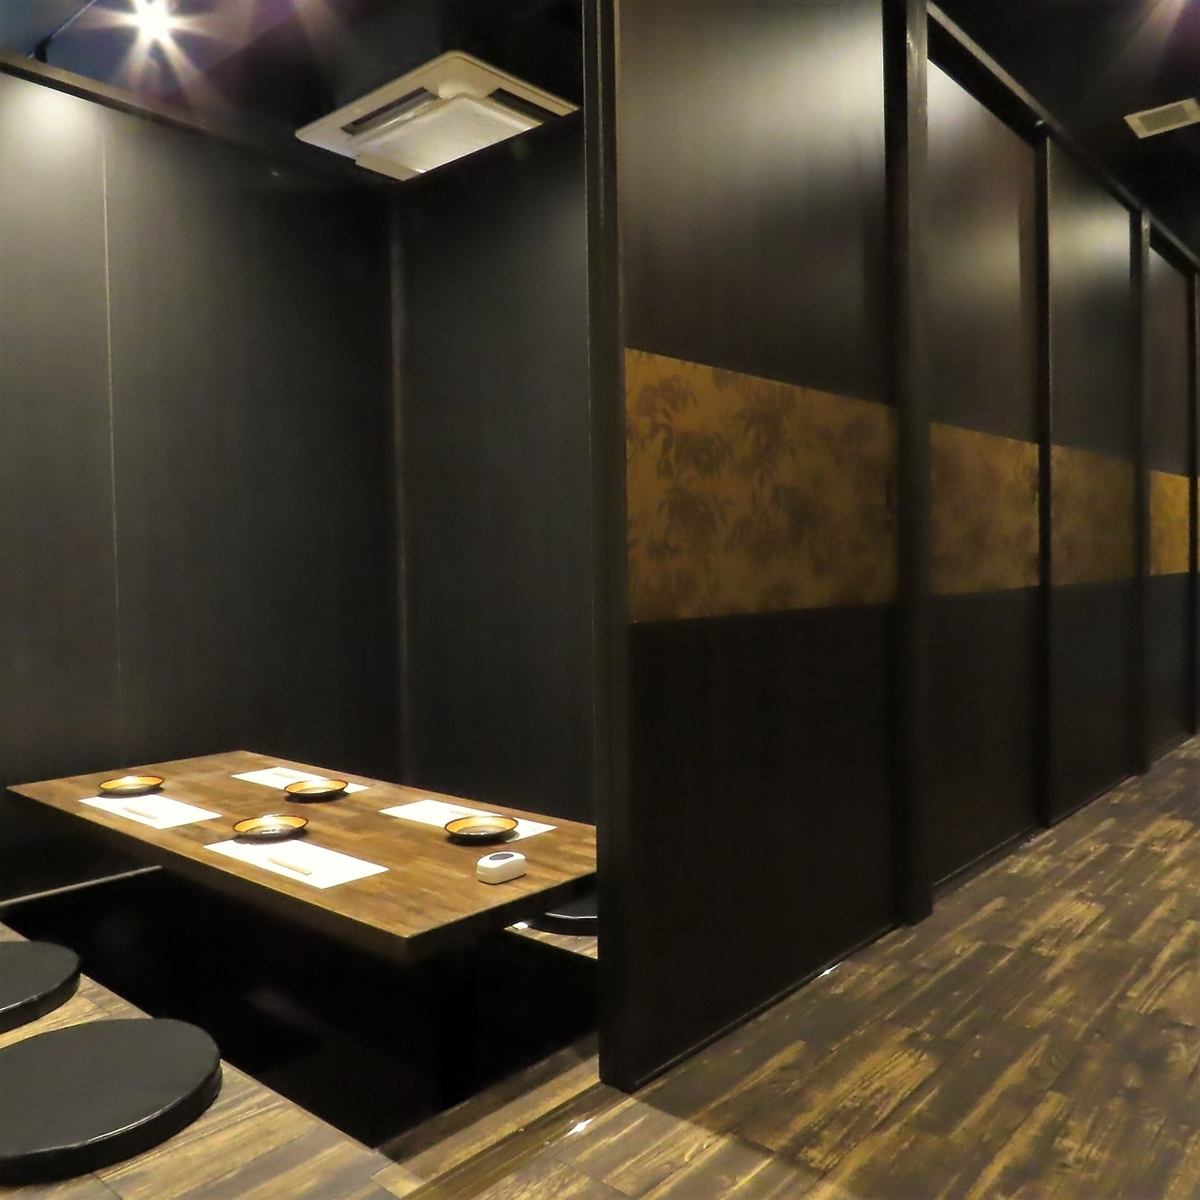 [Completely private room] Enjoy alcohol and carefully selected dishes without worrying about your surroundings